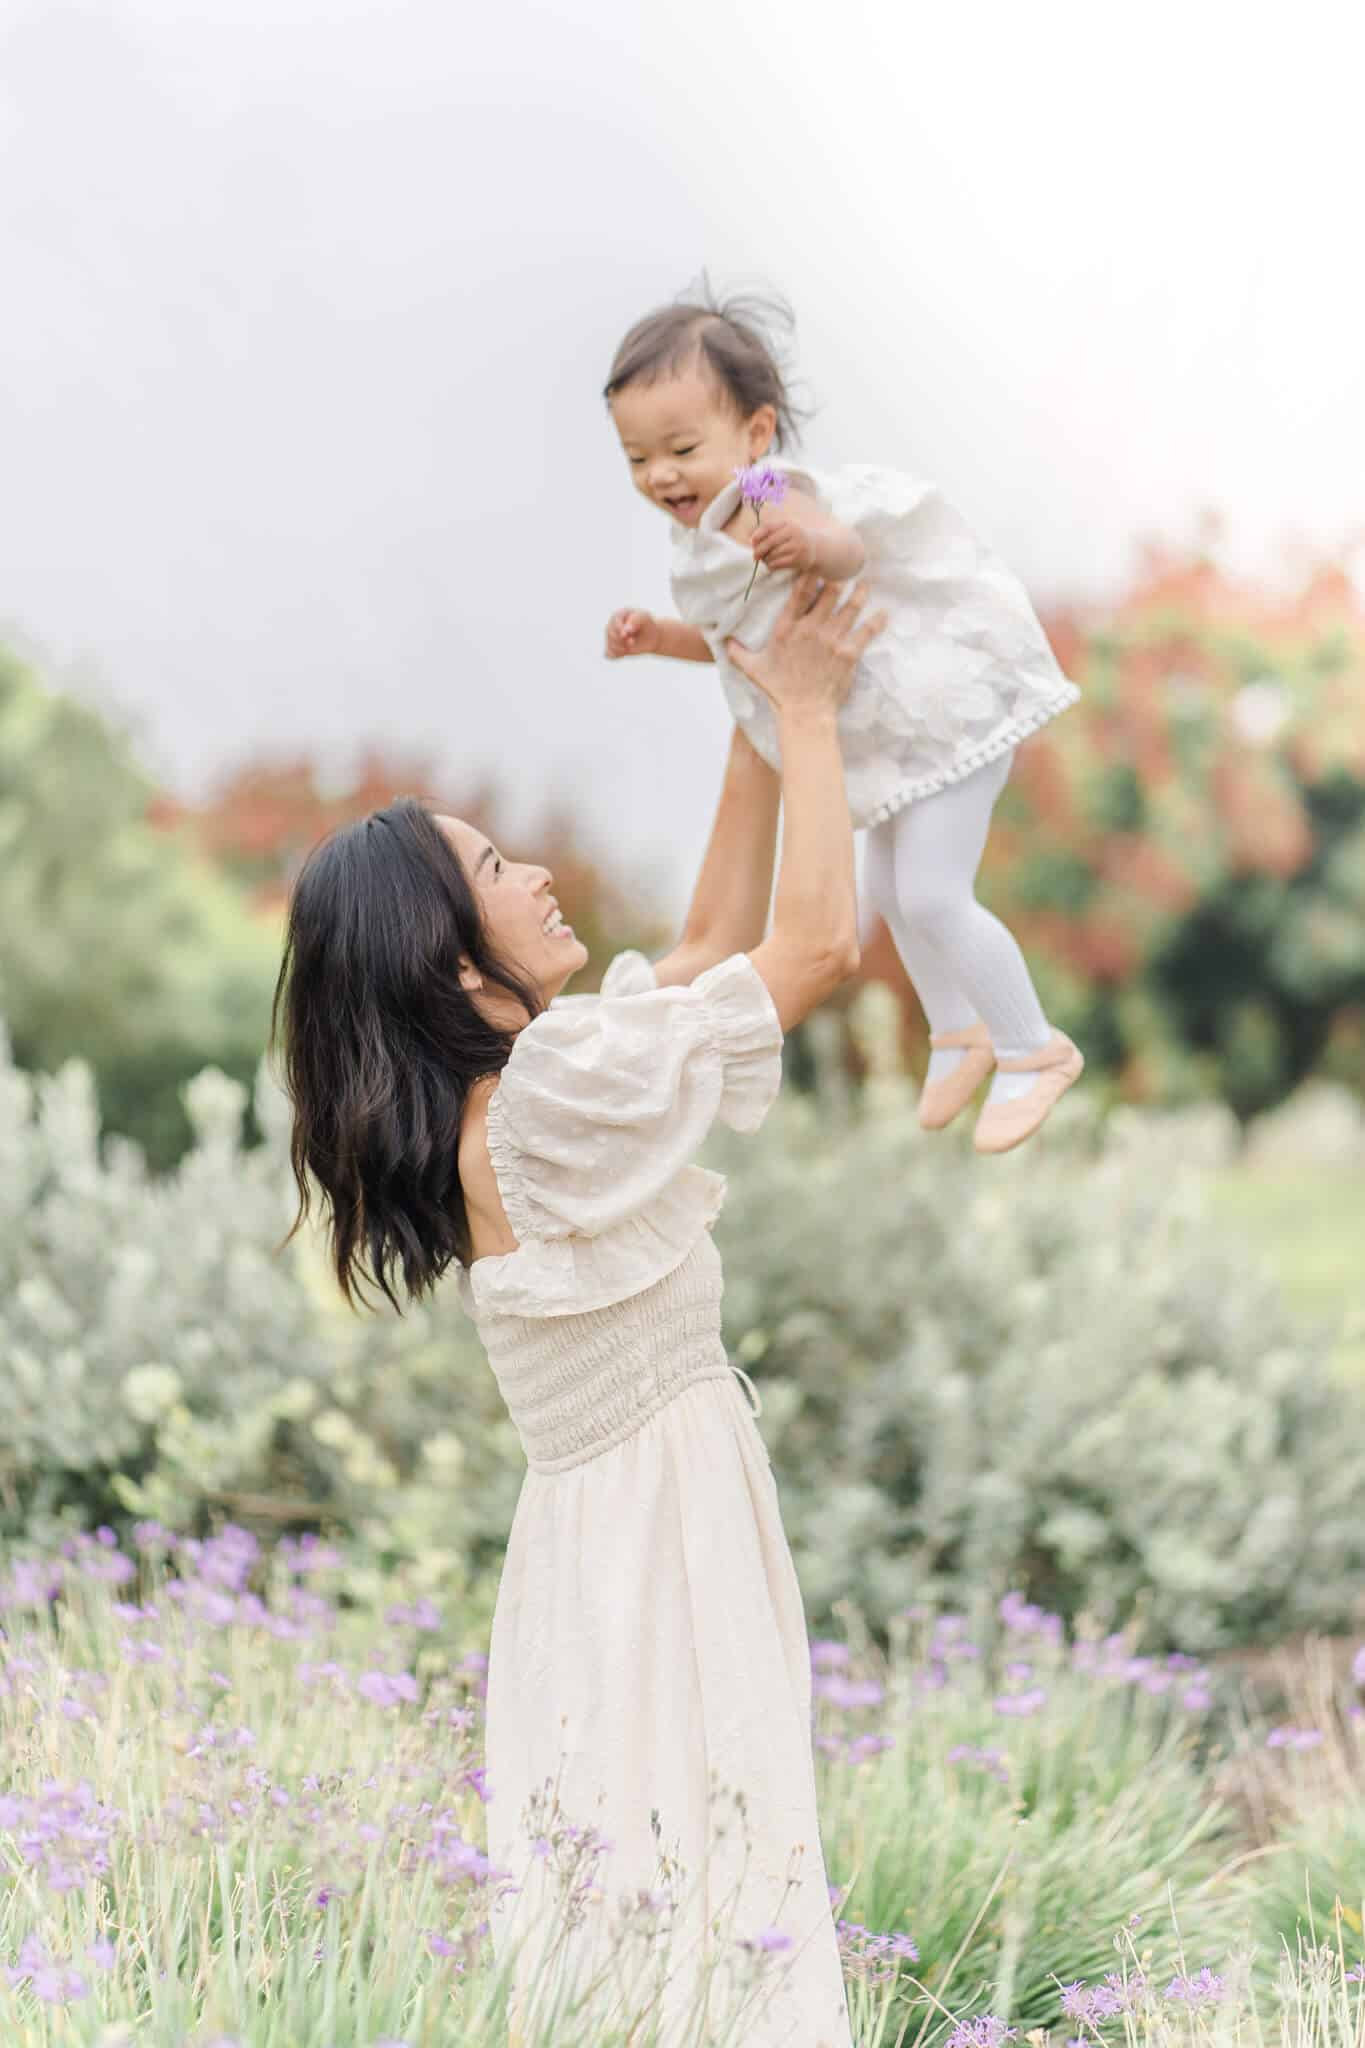 Mom tossing her 2 year old daughter into the air.